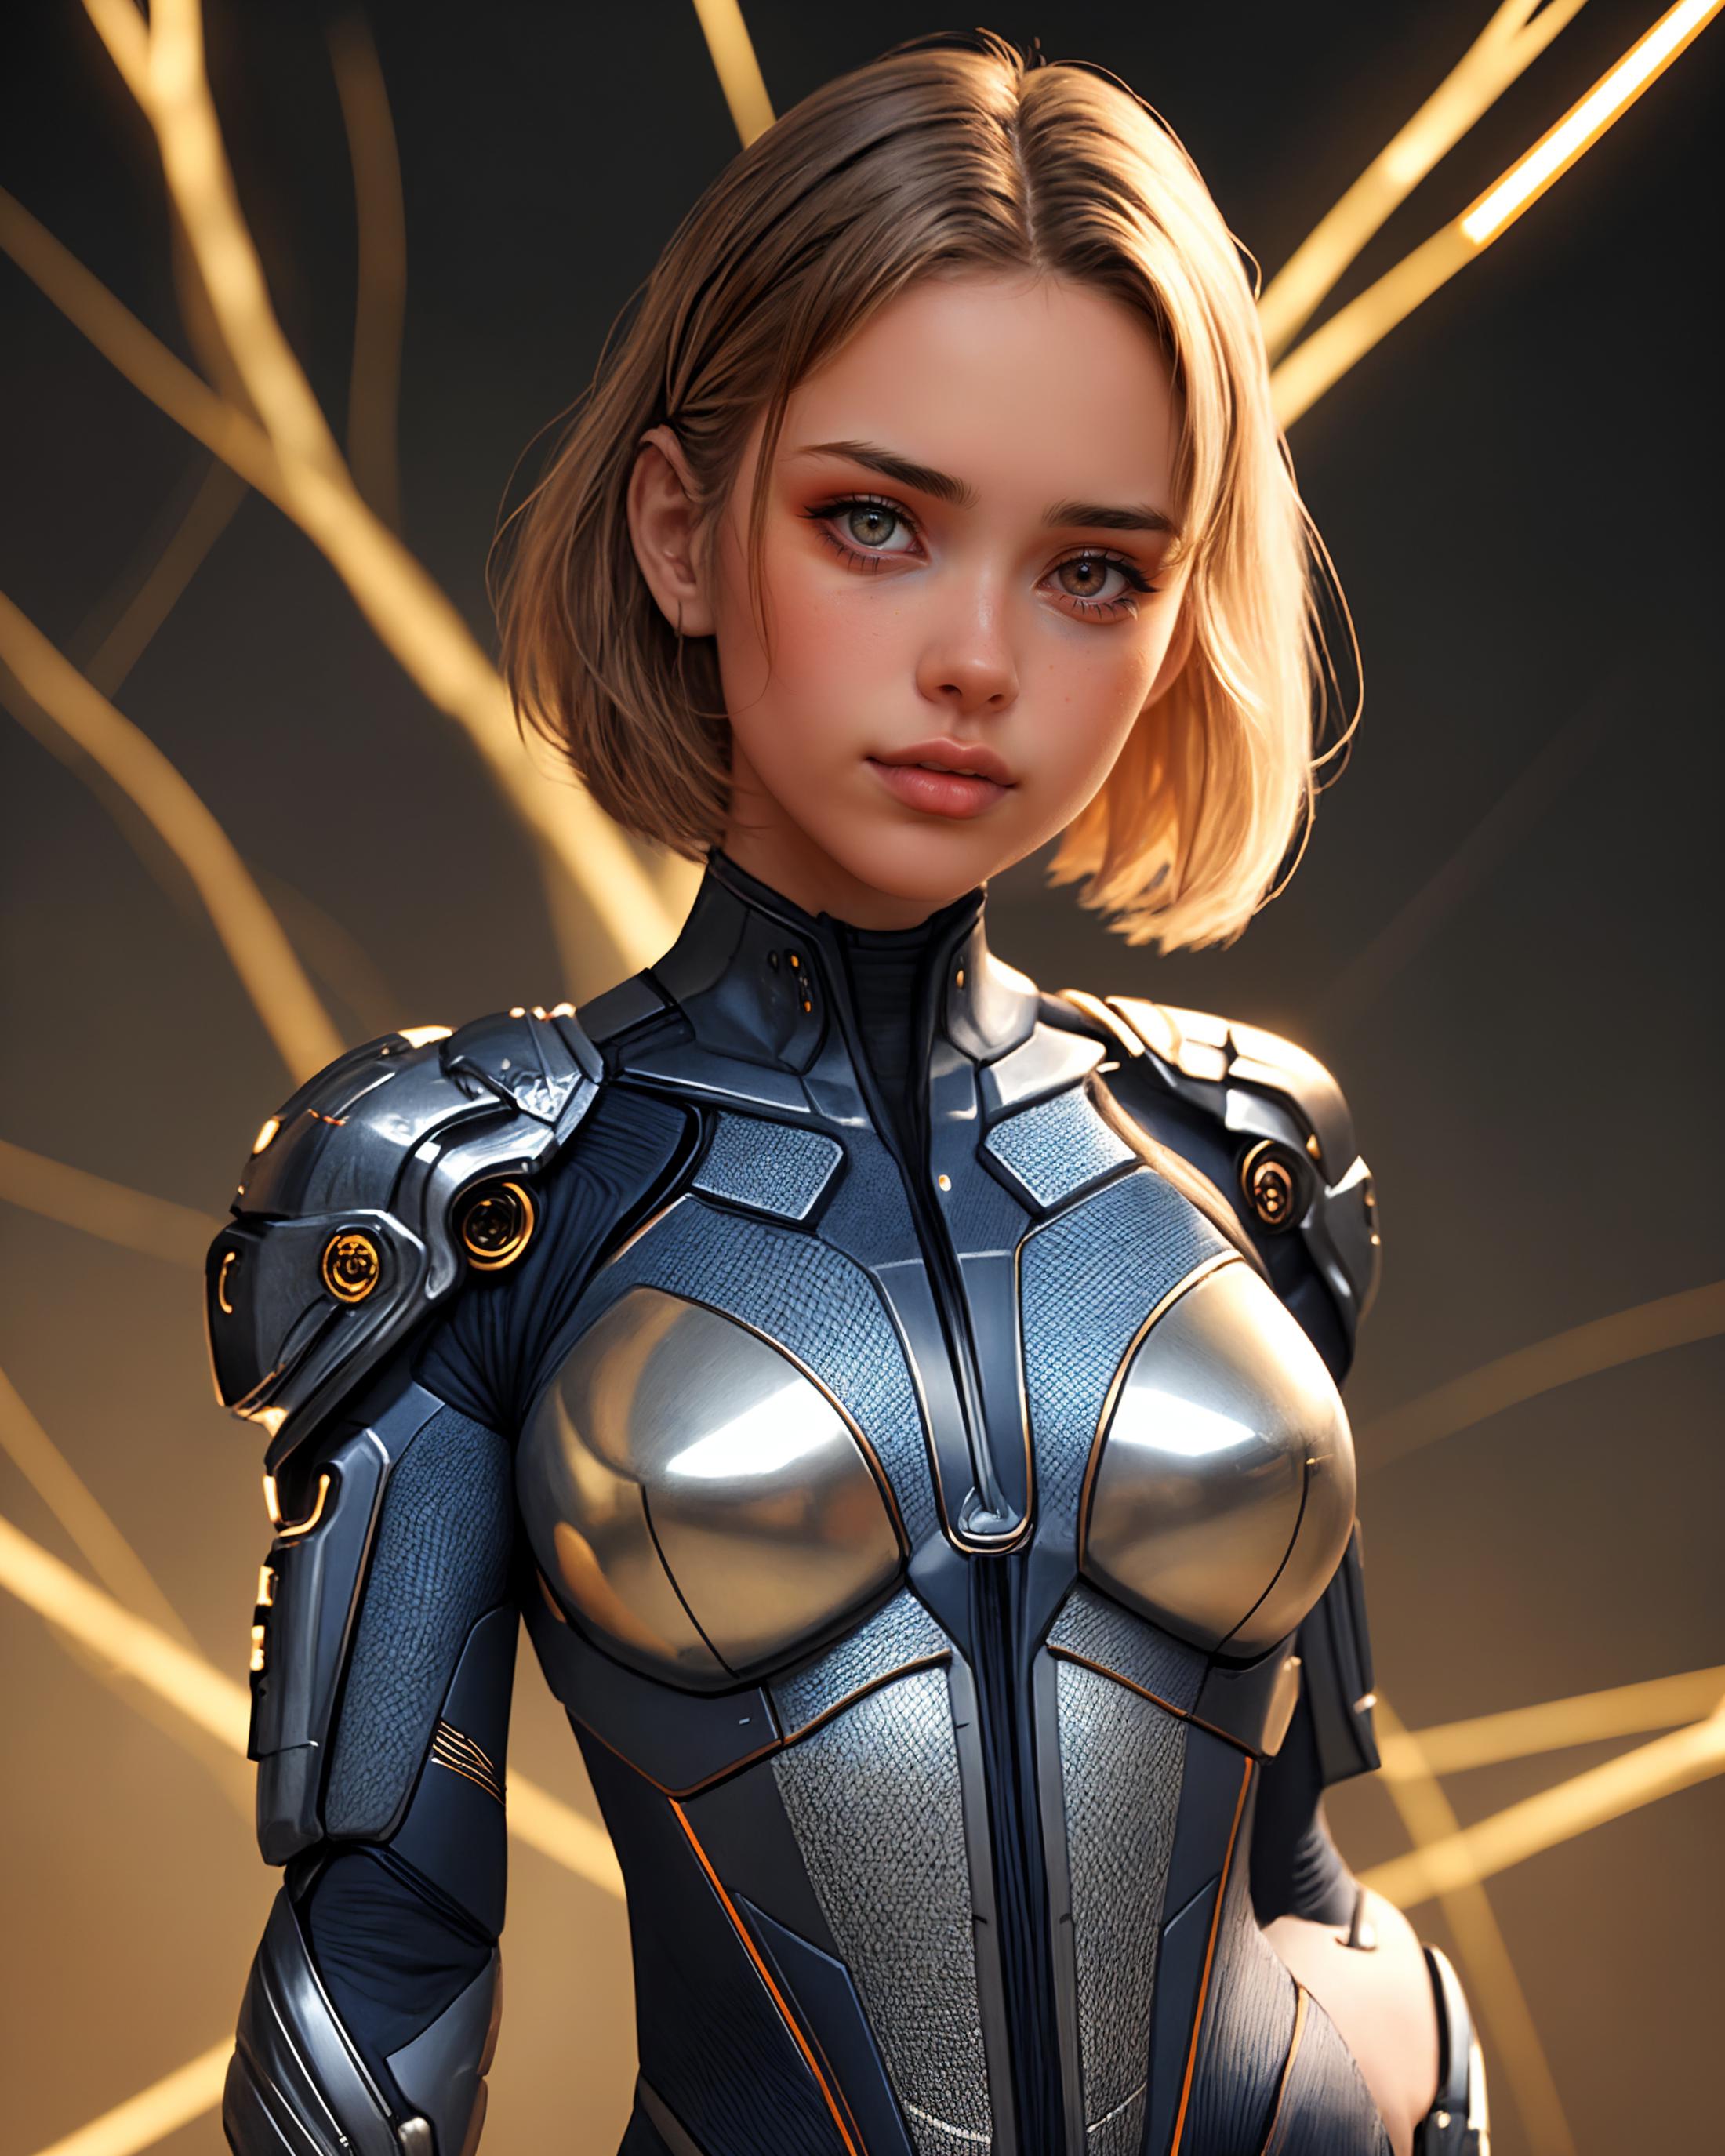 The Illustration of a Beautiful Blond-Haired Woman in a Blue, Shiny, Futuristic Outfit